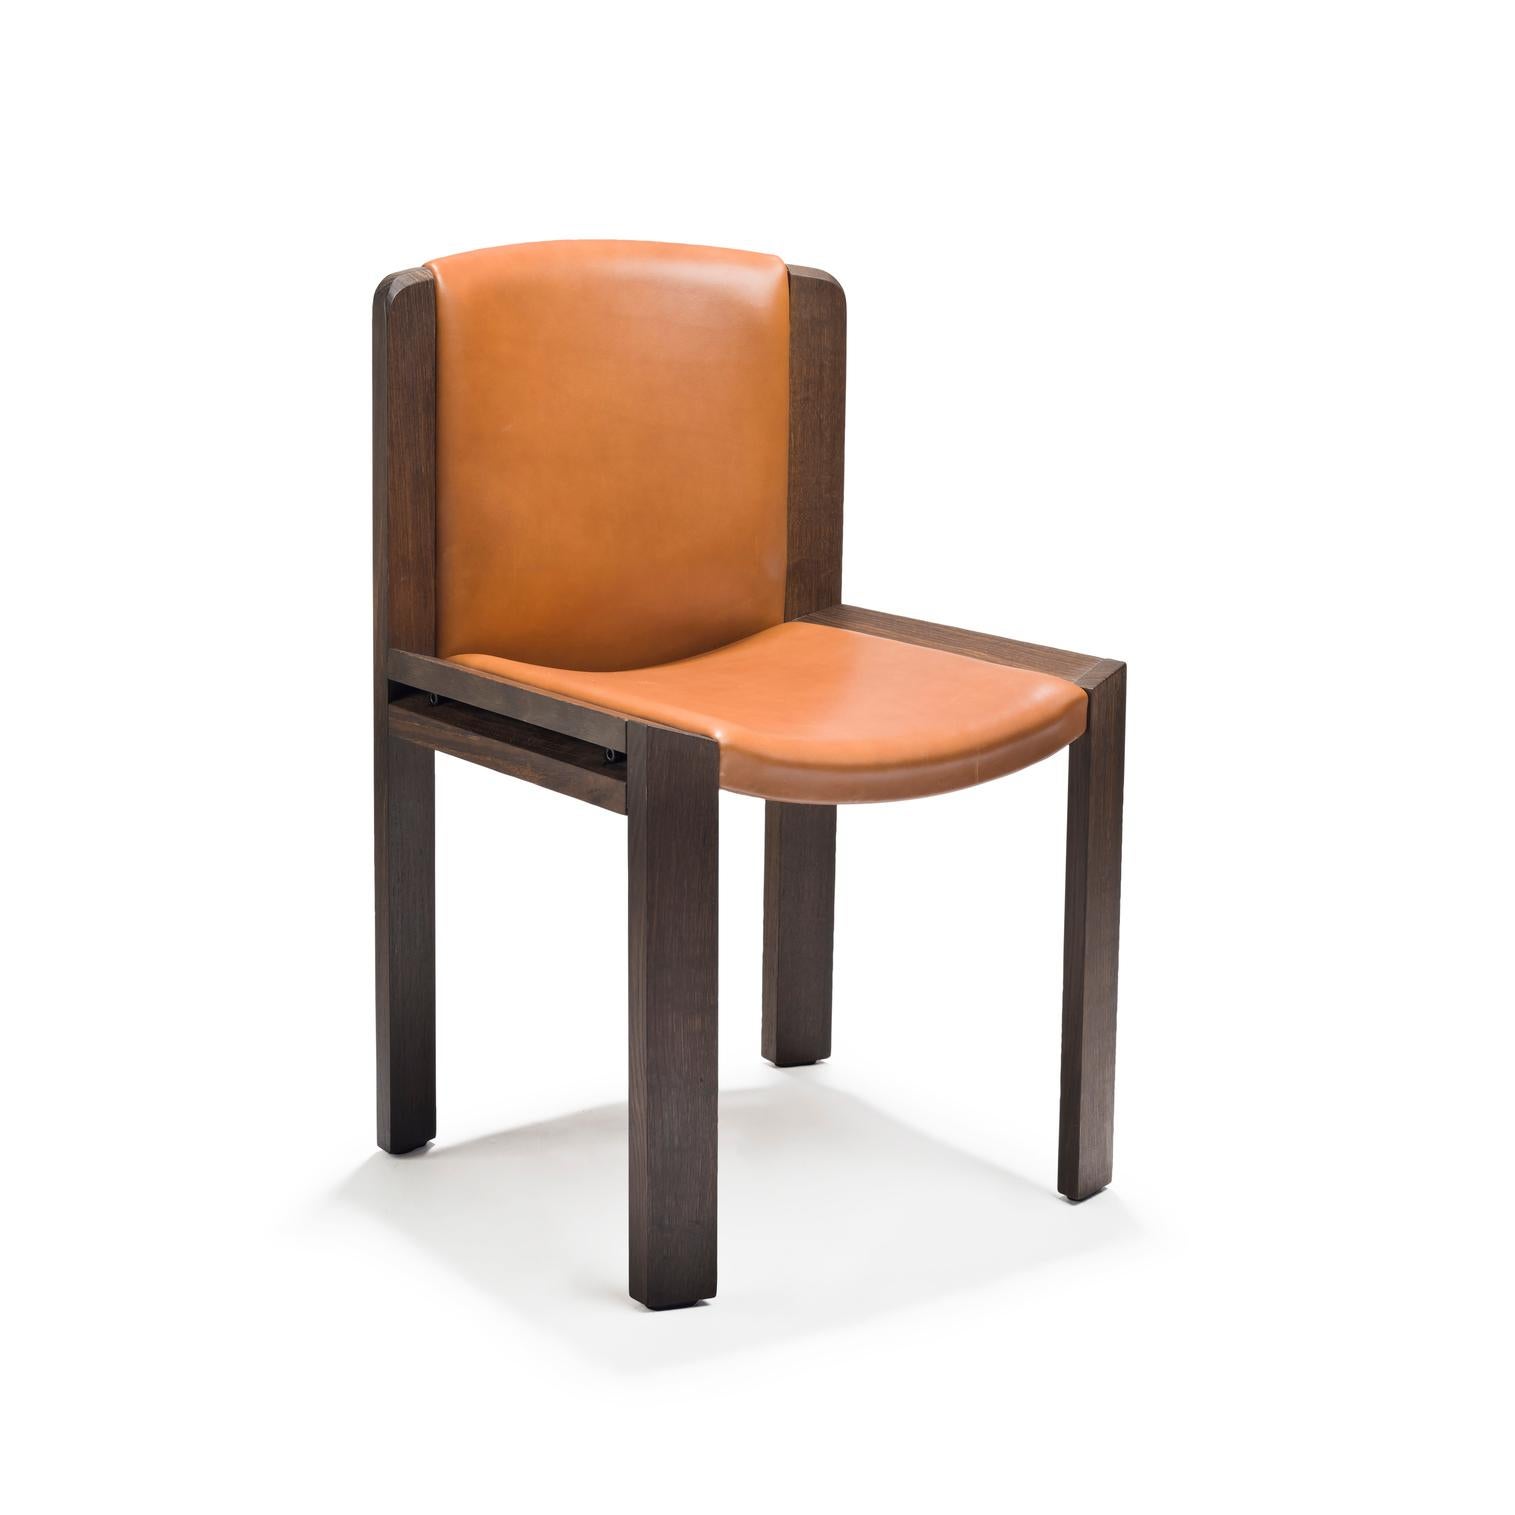 Joe Colombo 'Chair 300' Wood and Sørensen Leather by Karakter For Sale 3